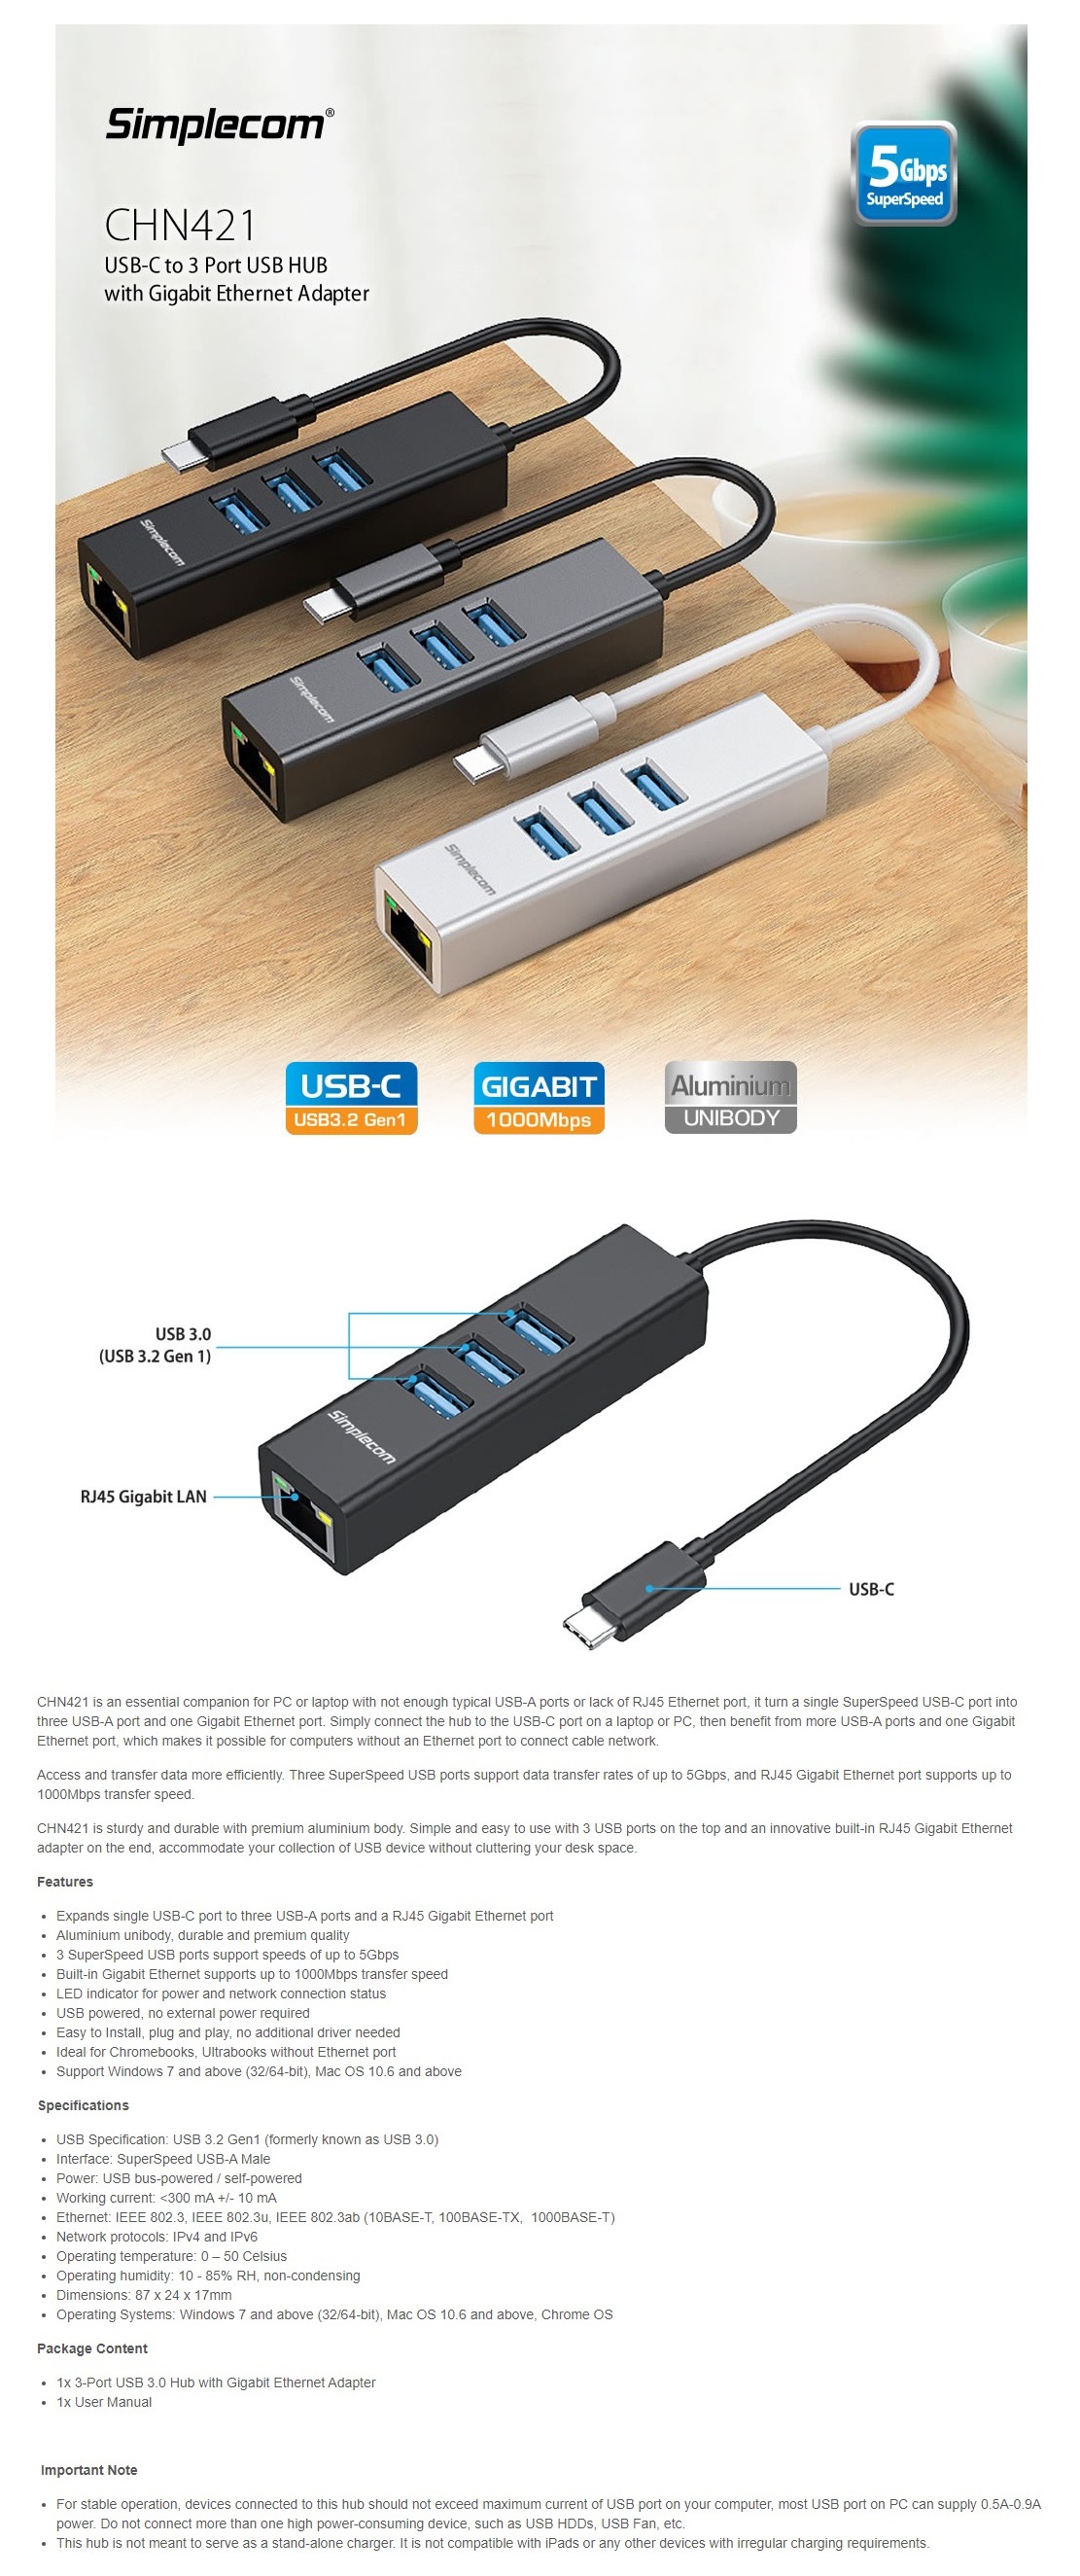 A large marketing image providing additional information about the product Simplecom CHN421 USB-C to 3 Port USB-A HUB w/ Gigabit Ethernet Adapter - Silver - Additional alt info not provided